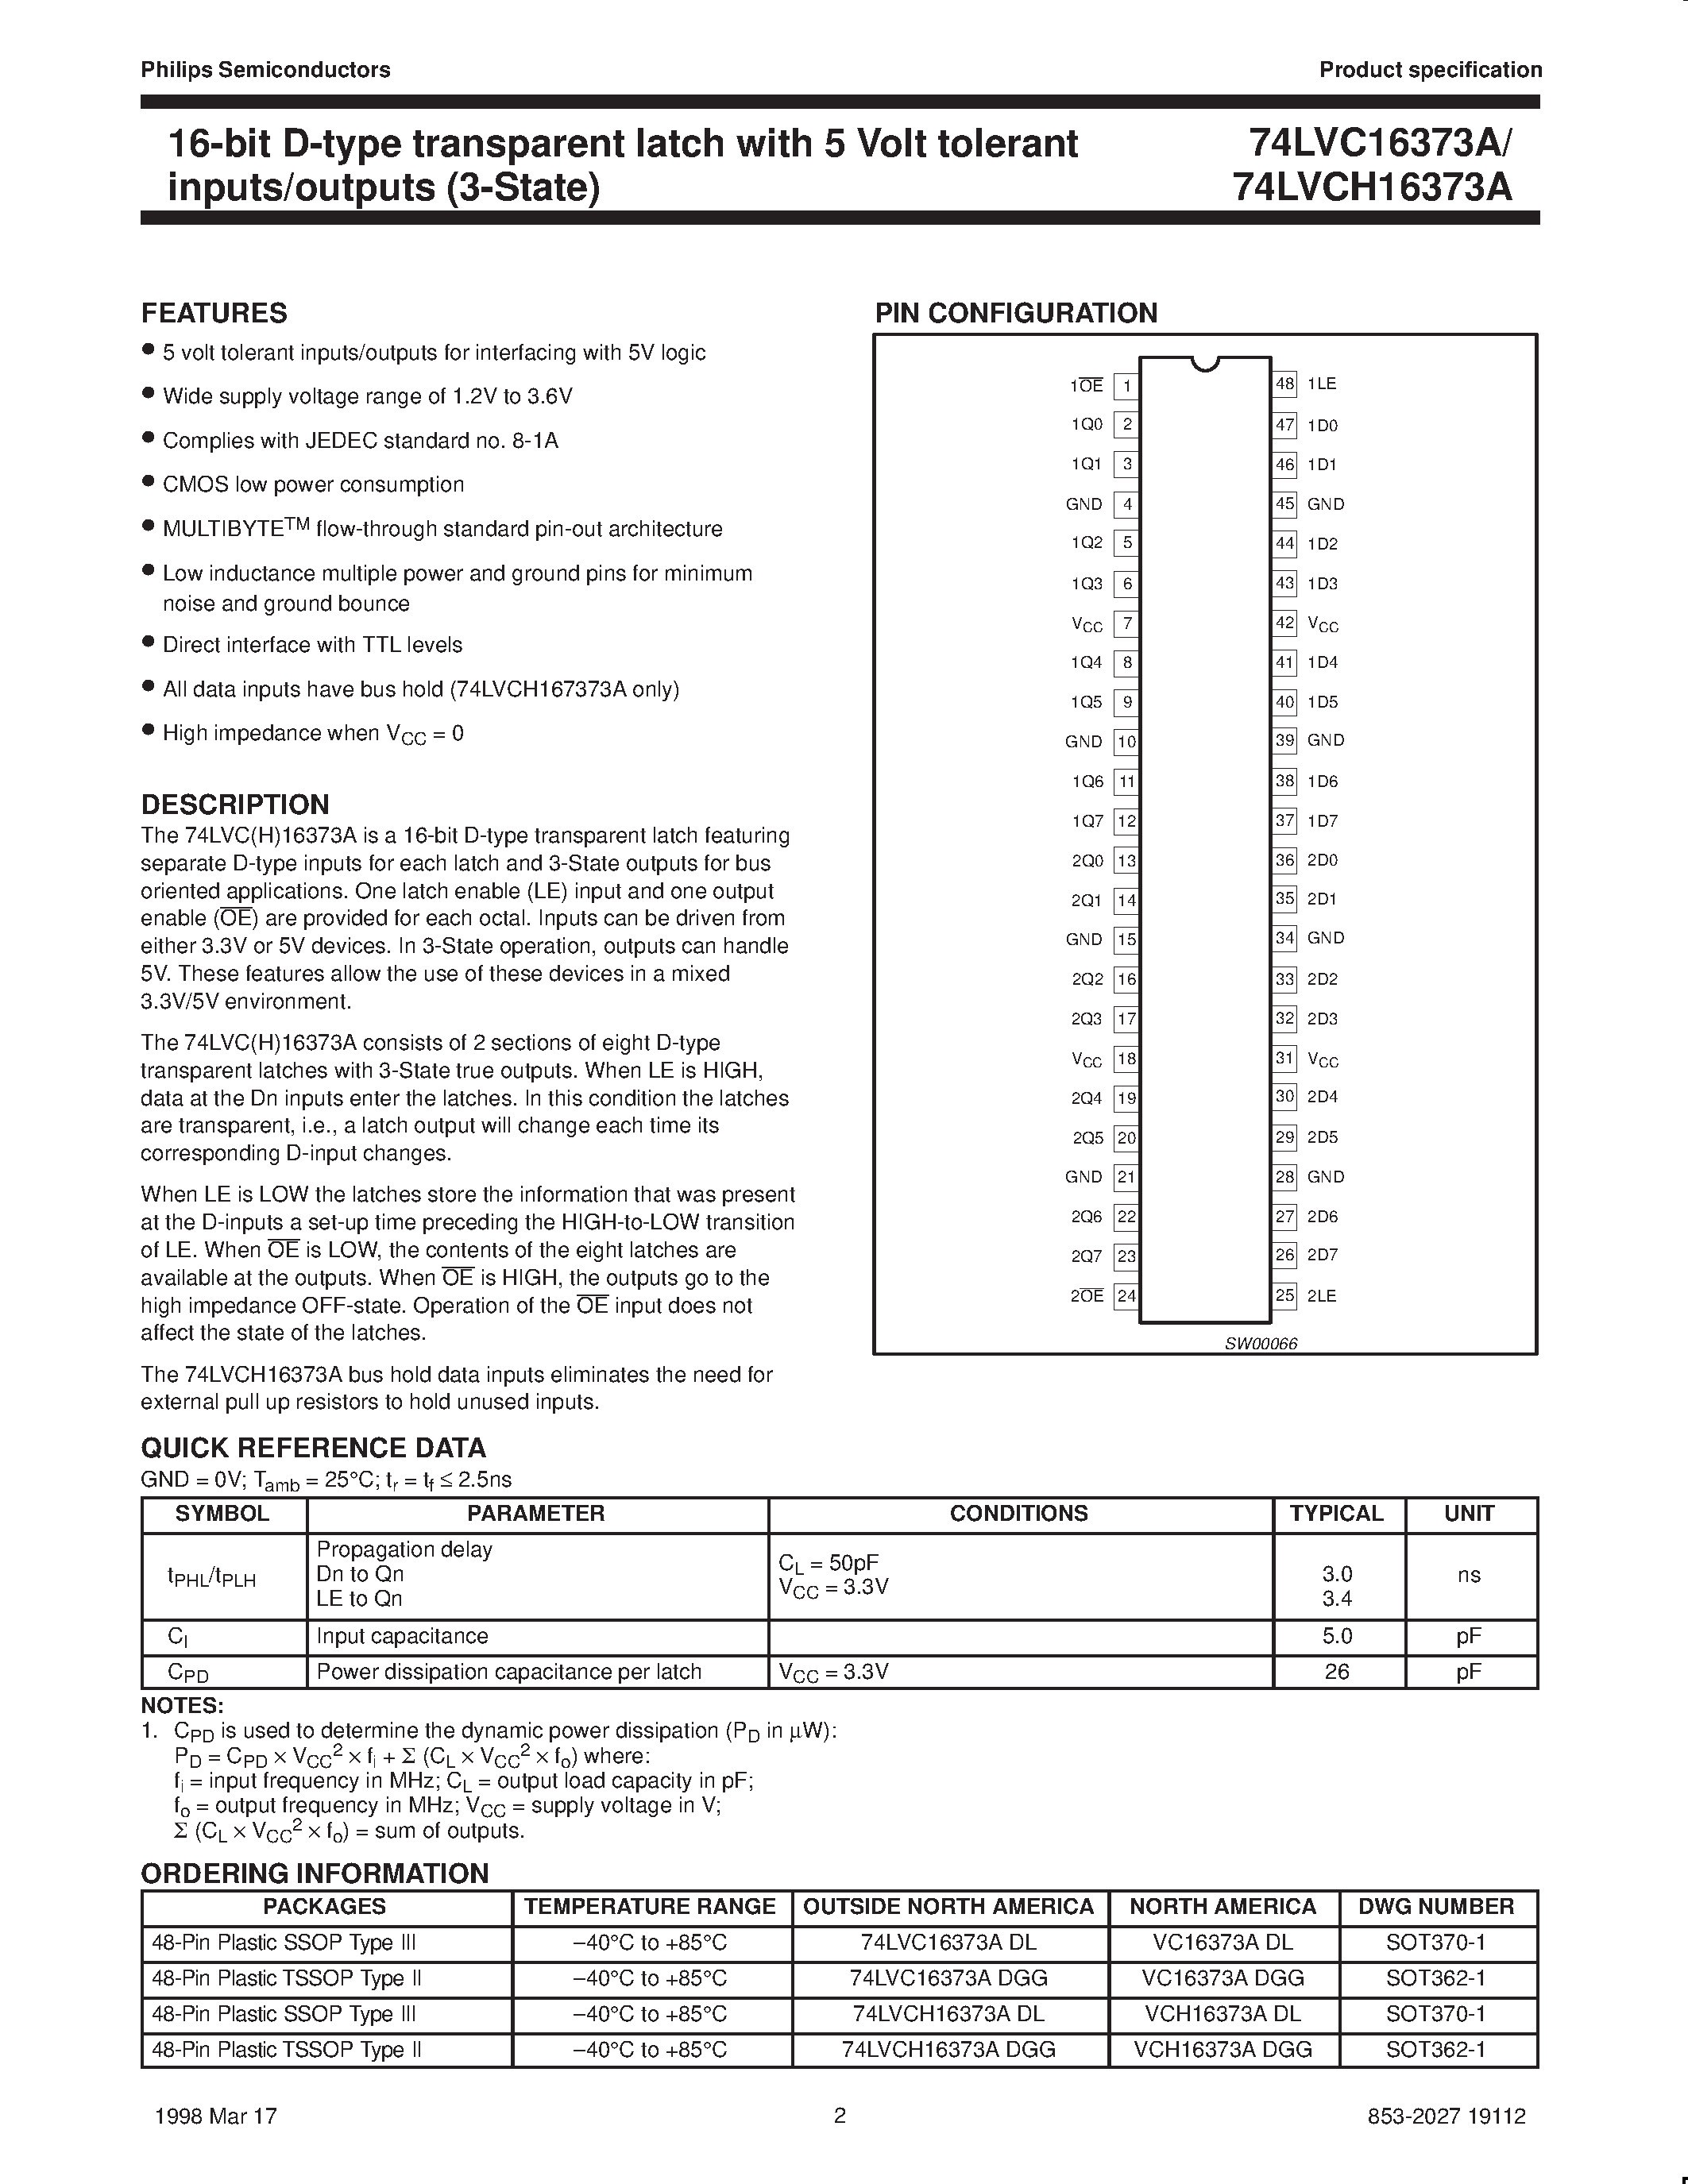 Datasheet VCH16373ADGG - 16-bit D-type transparent latch with 5 Volt tolerant inputs/outputs 3-State page 2